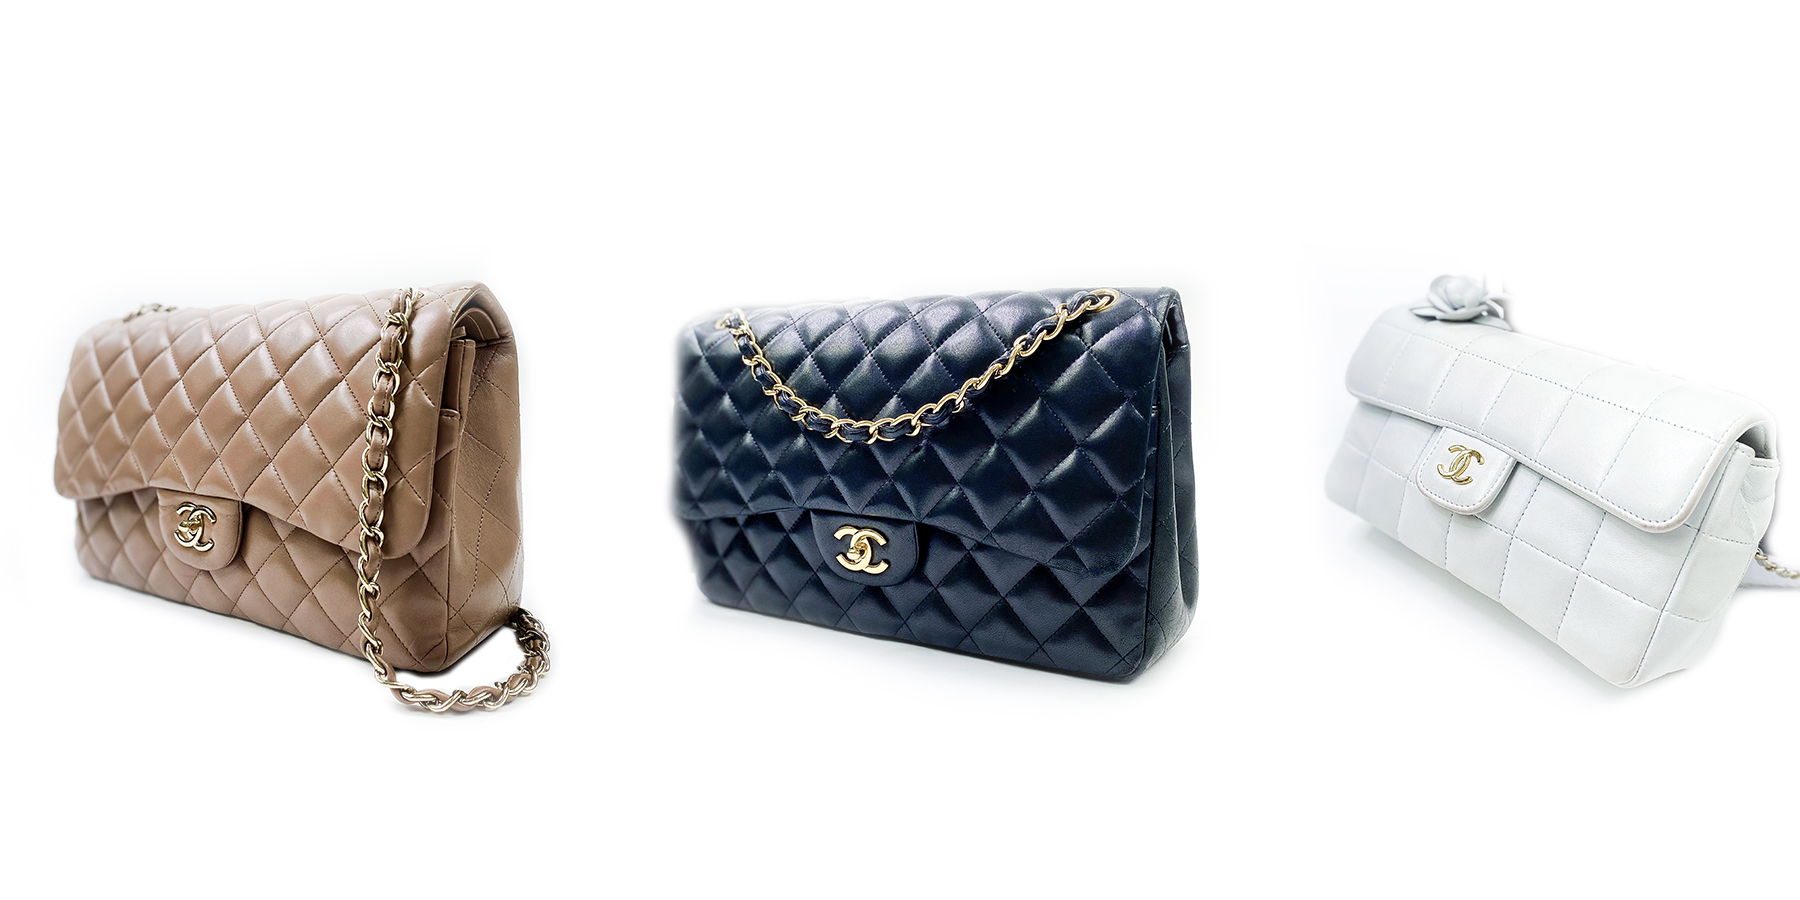 Lambskin Leather Classic Chanel's Available to Purchase at Handbag Clinic